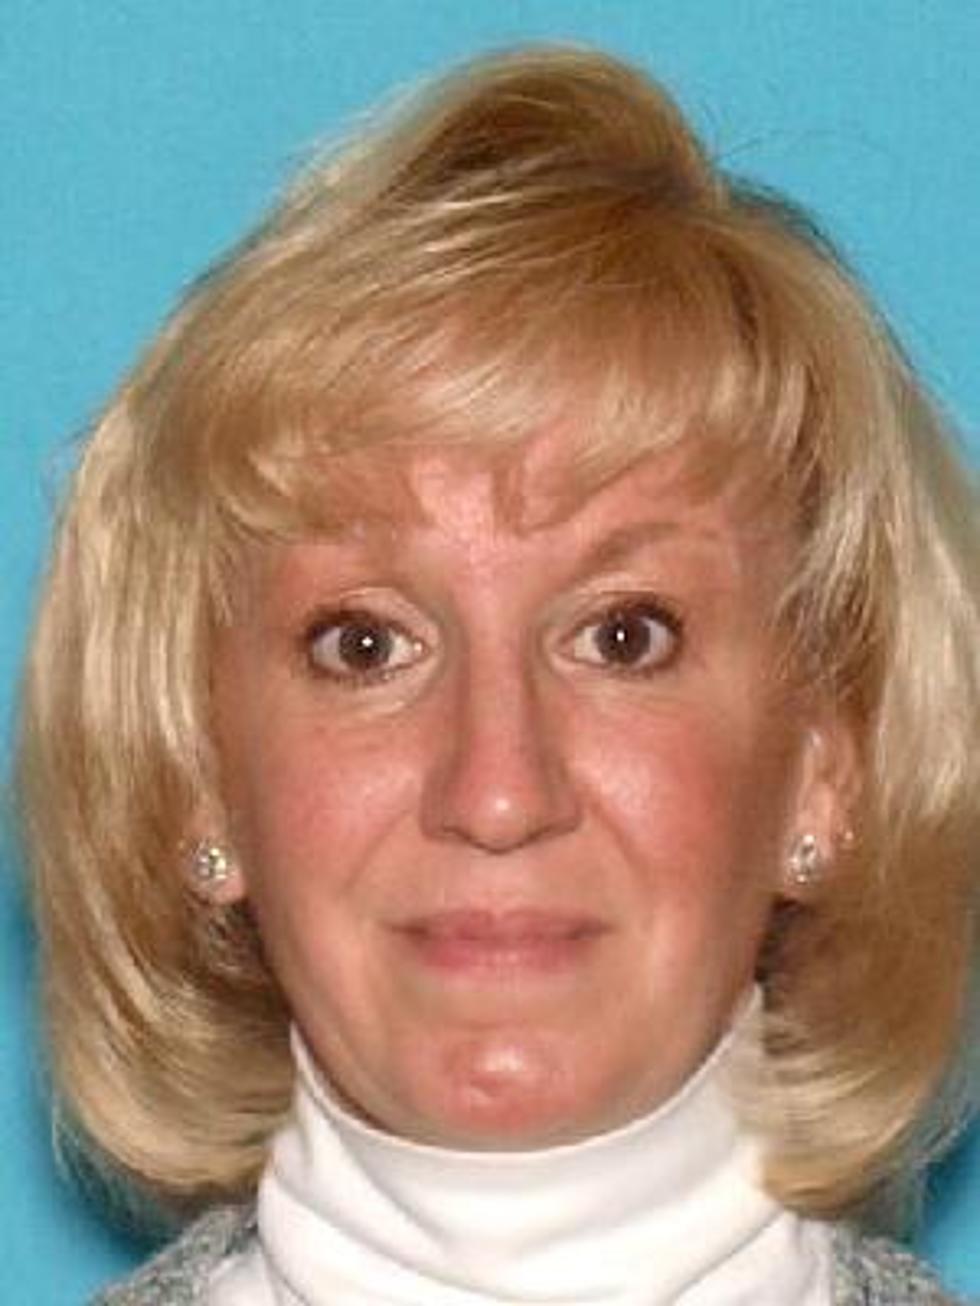 Former Pine Beach Elementary PTO President charged with Theft